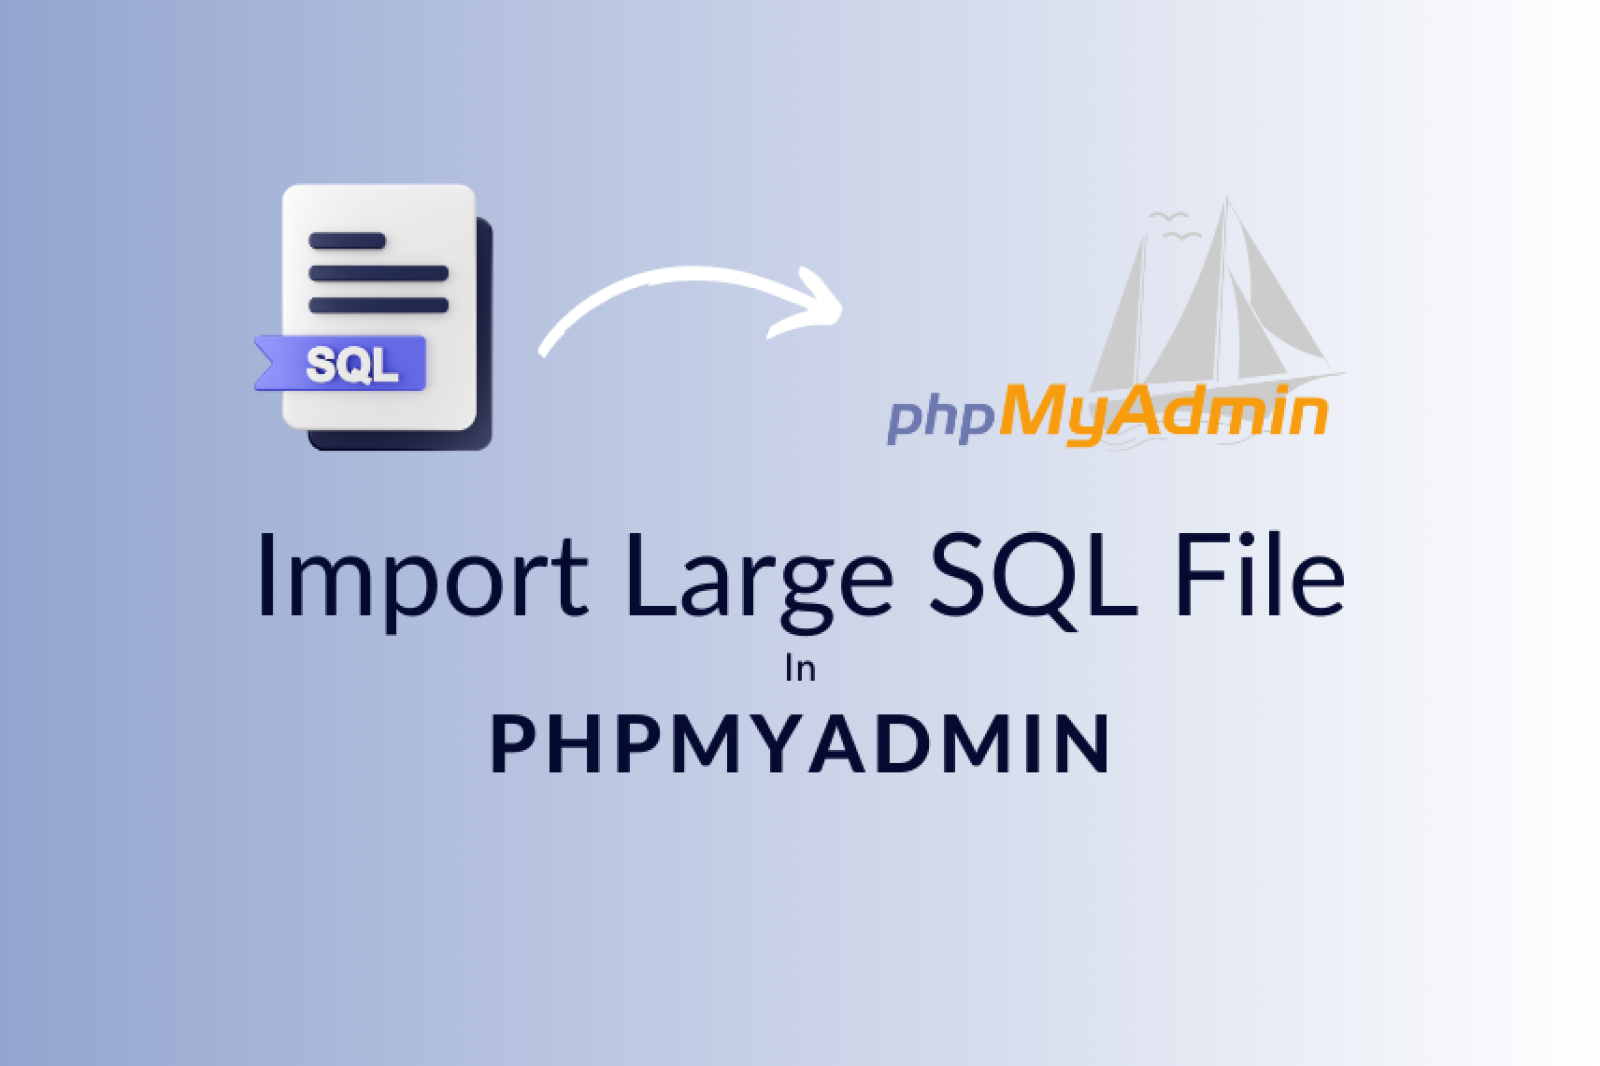 How To Import Large SQL File In PHPMyadmin